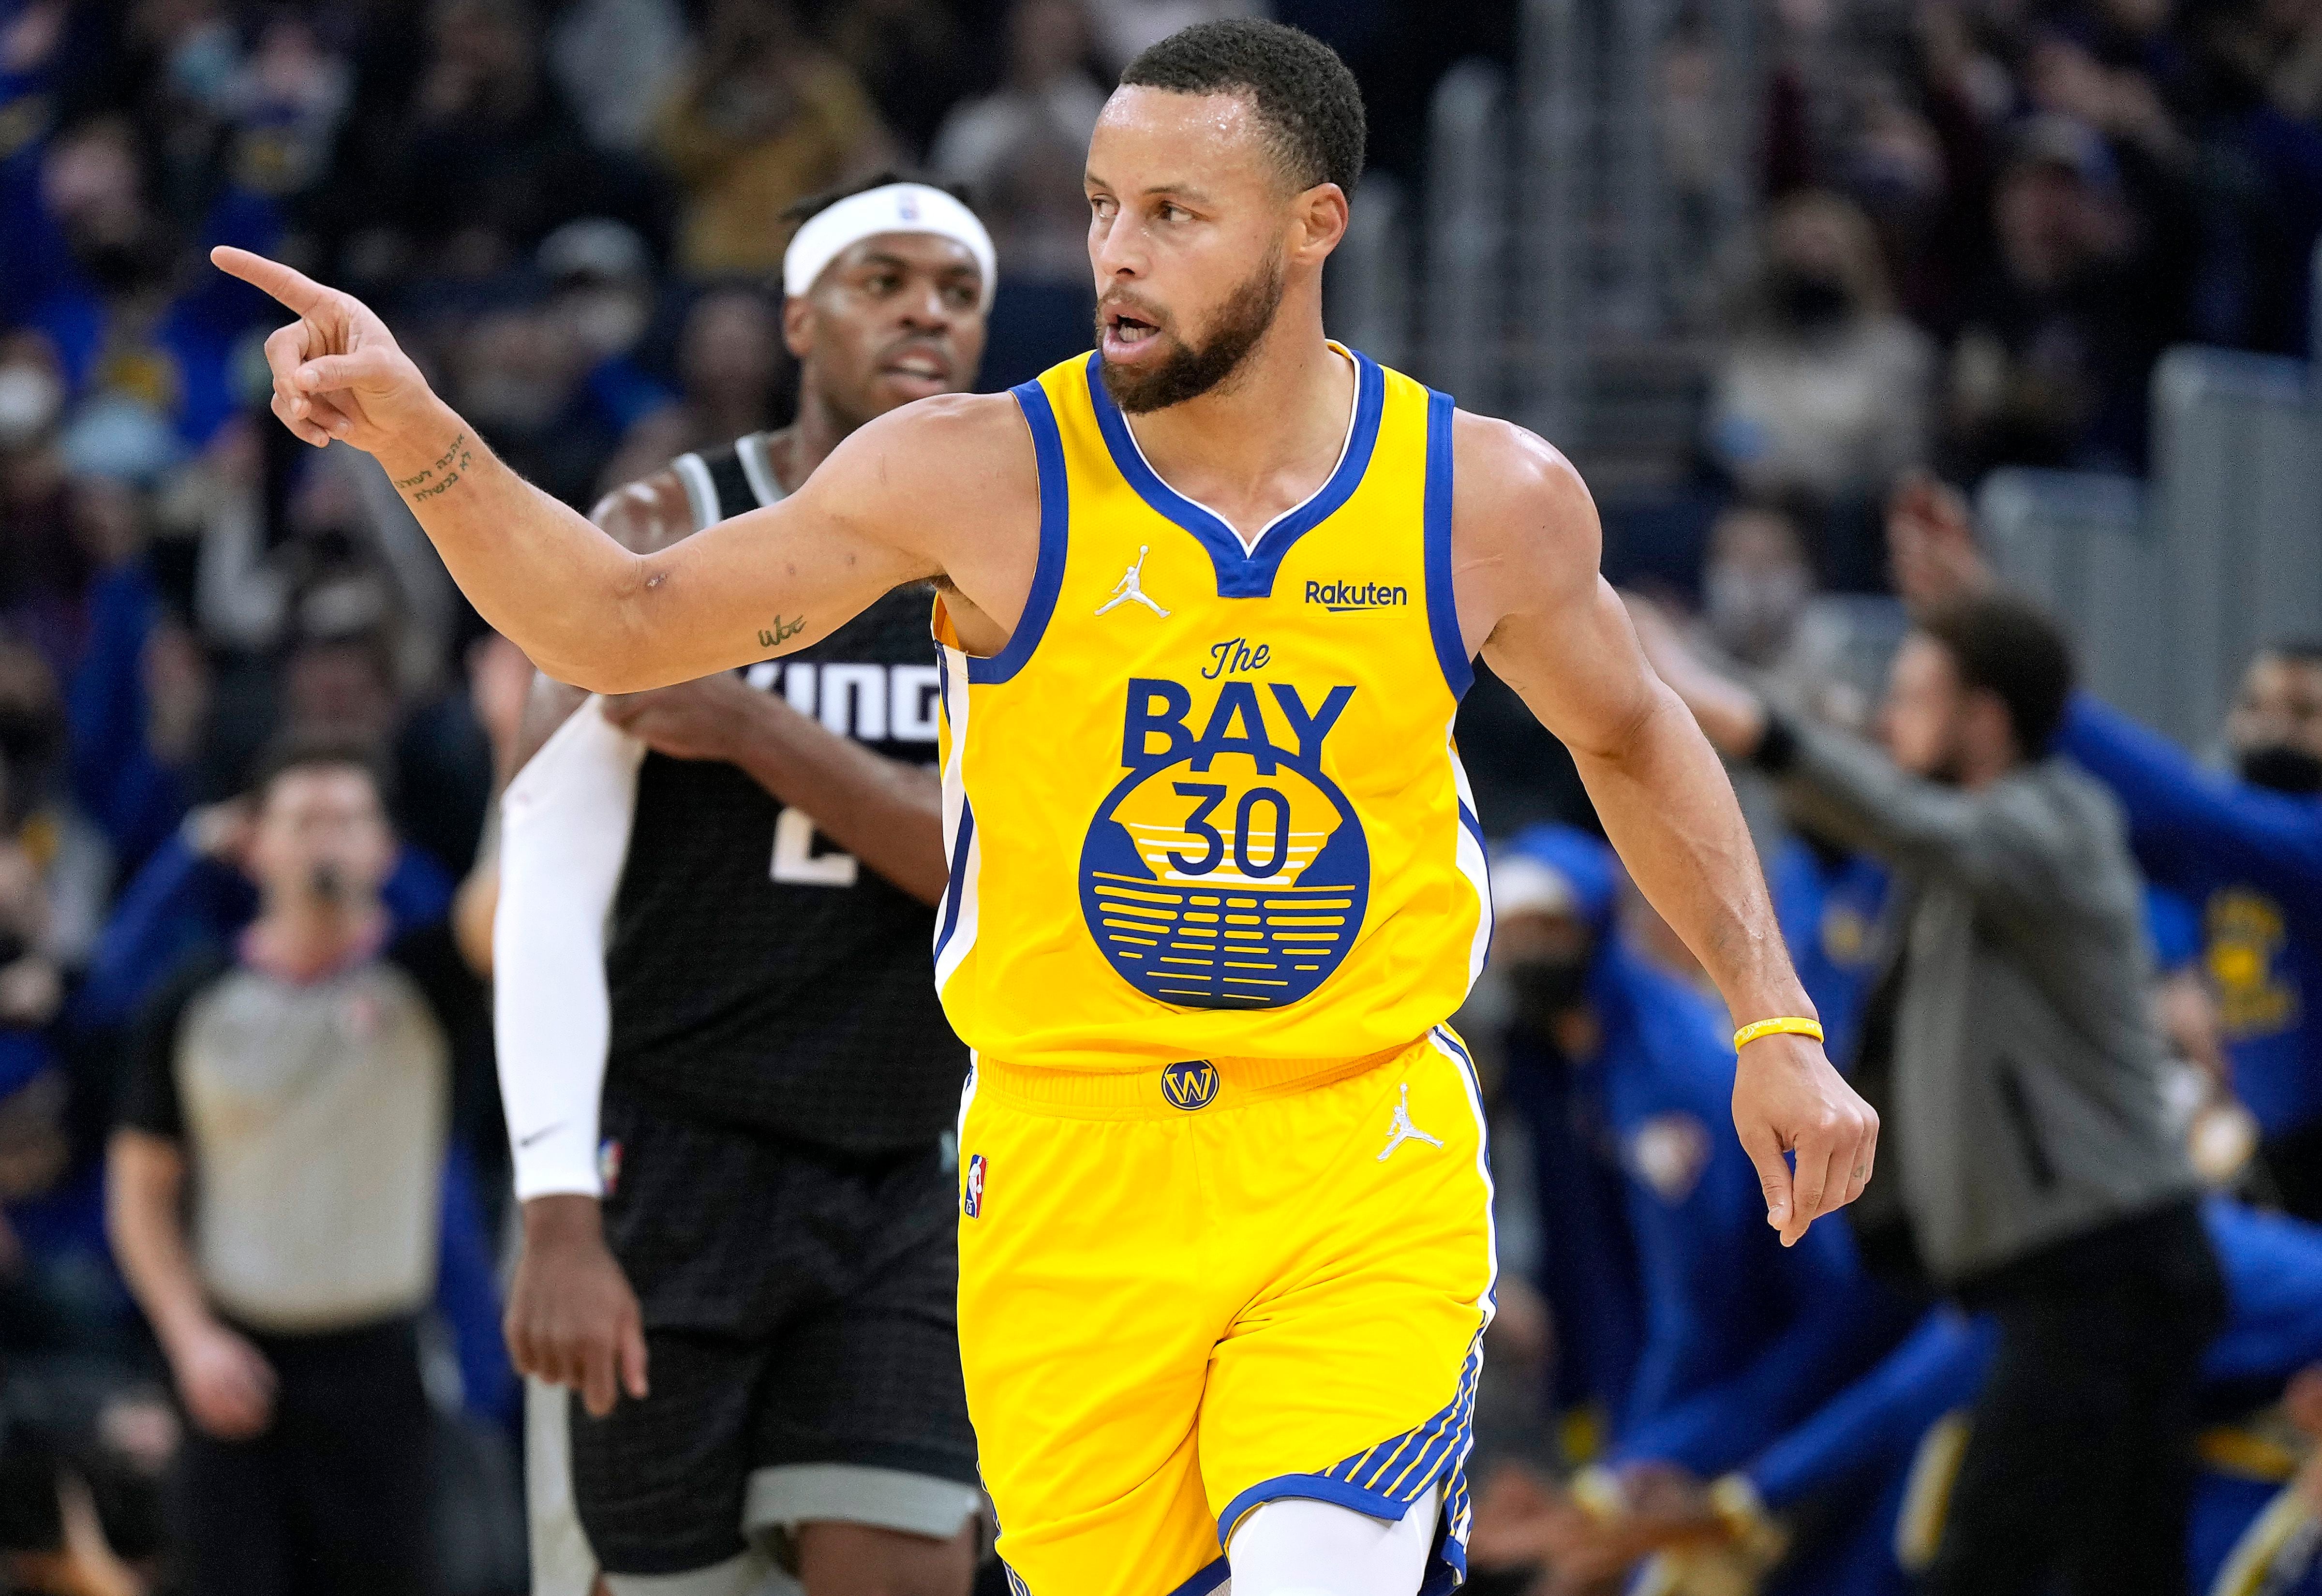 Dalset aburrido exterior Under Armour Steps Into the Metaverse With 'Wearable' Steph Curry Sneakers